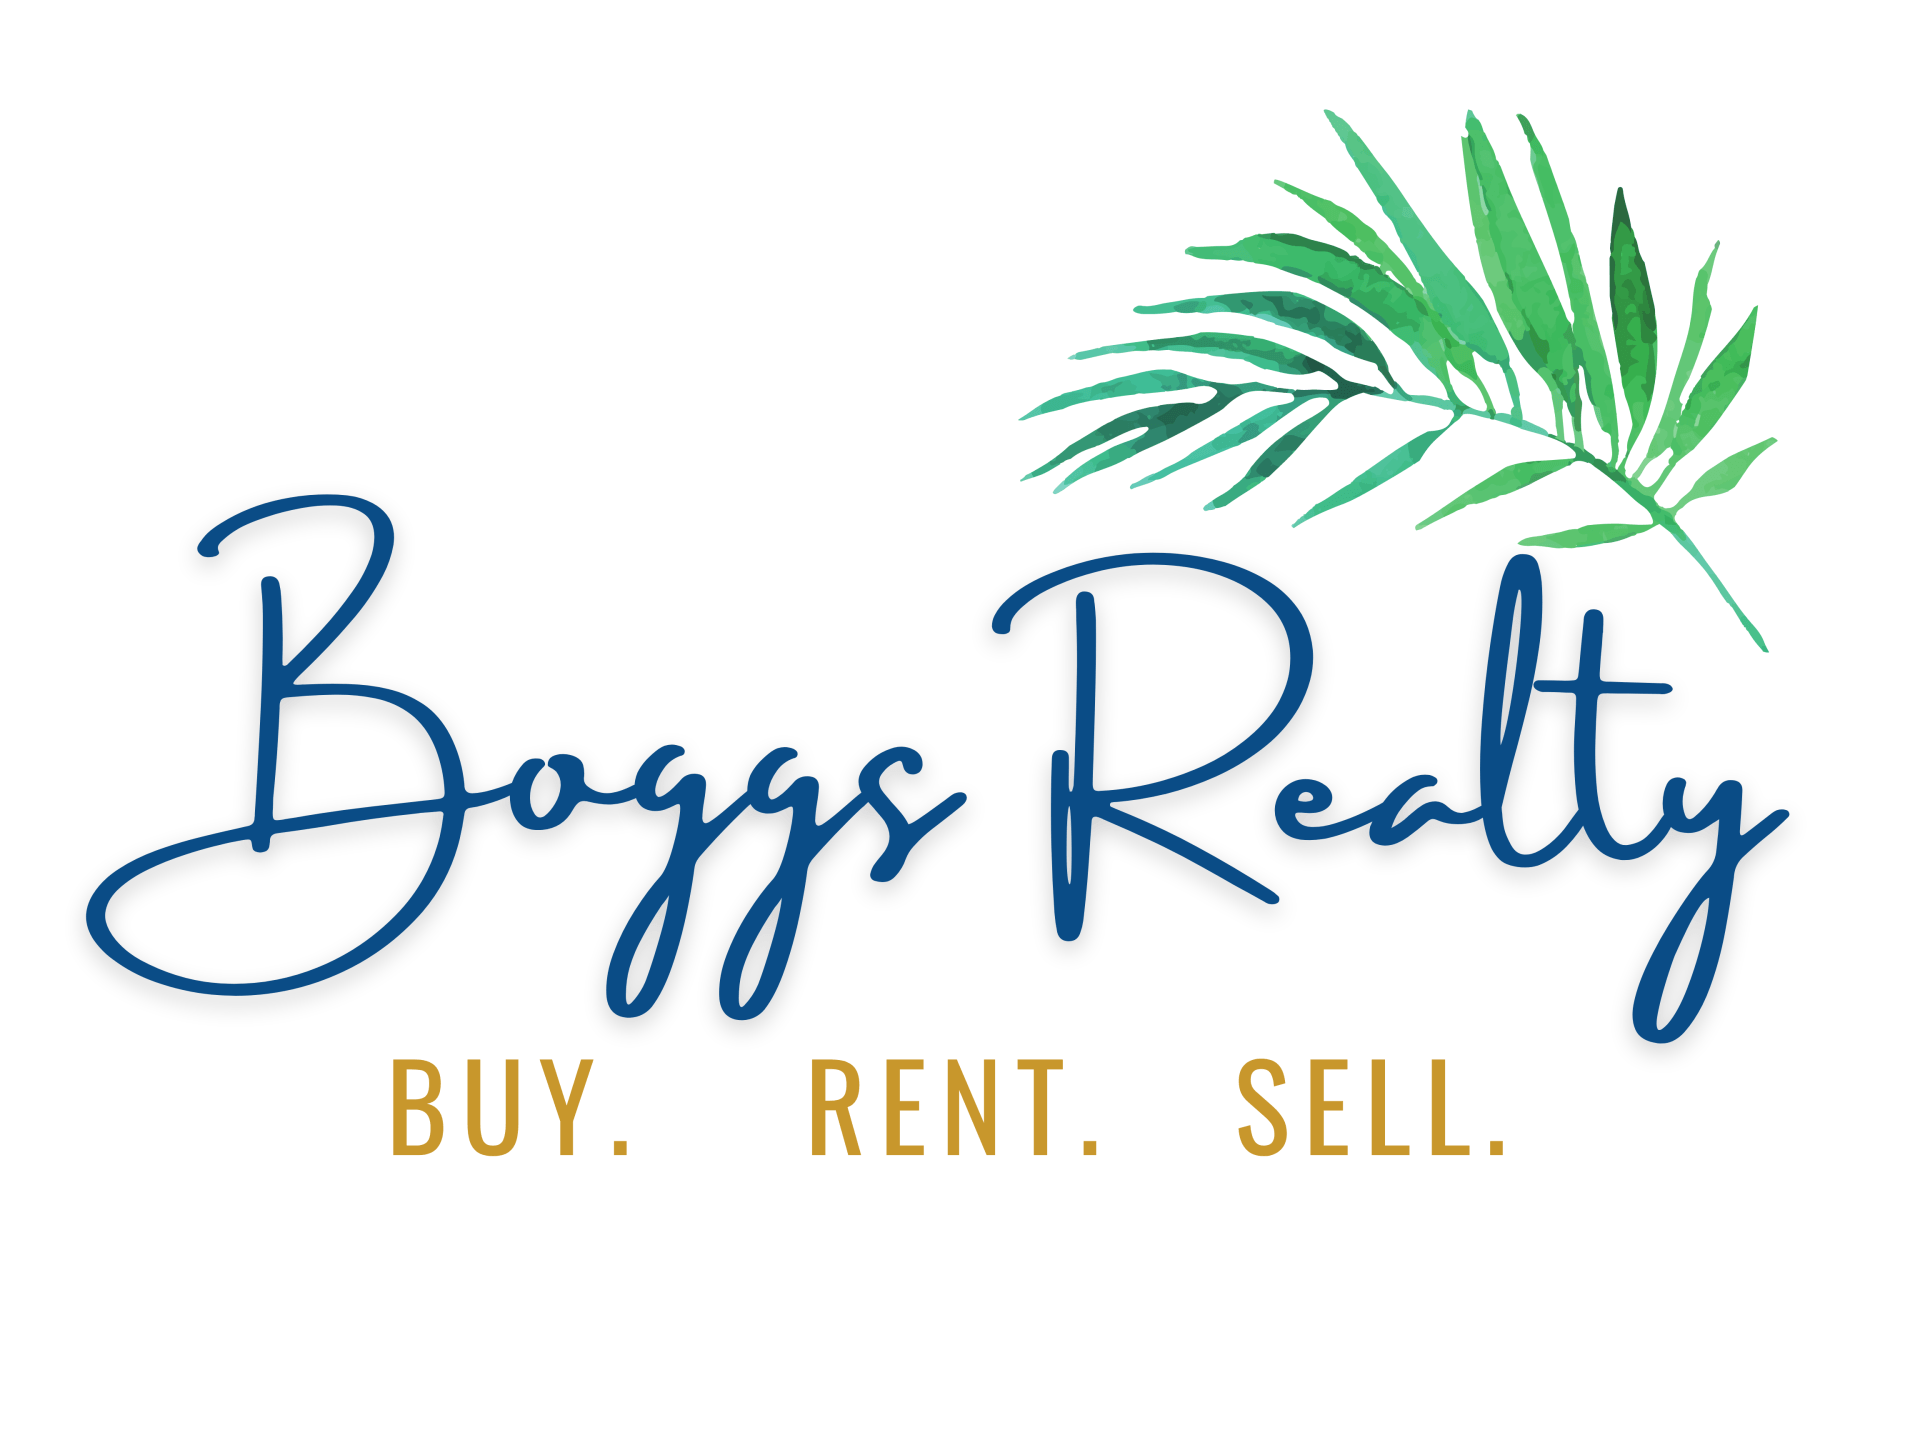 Elaine Boggs Realty Group Logo